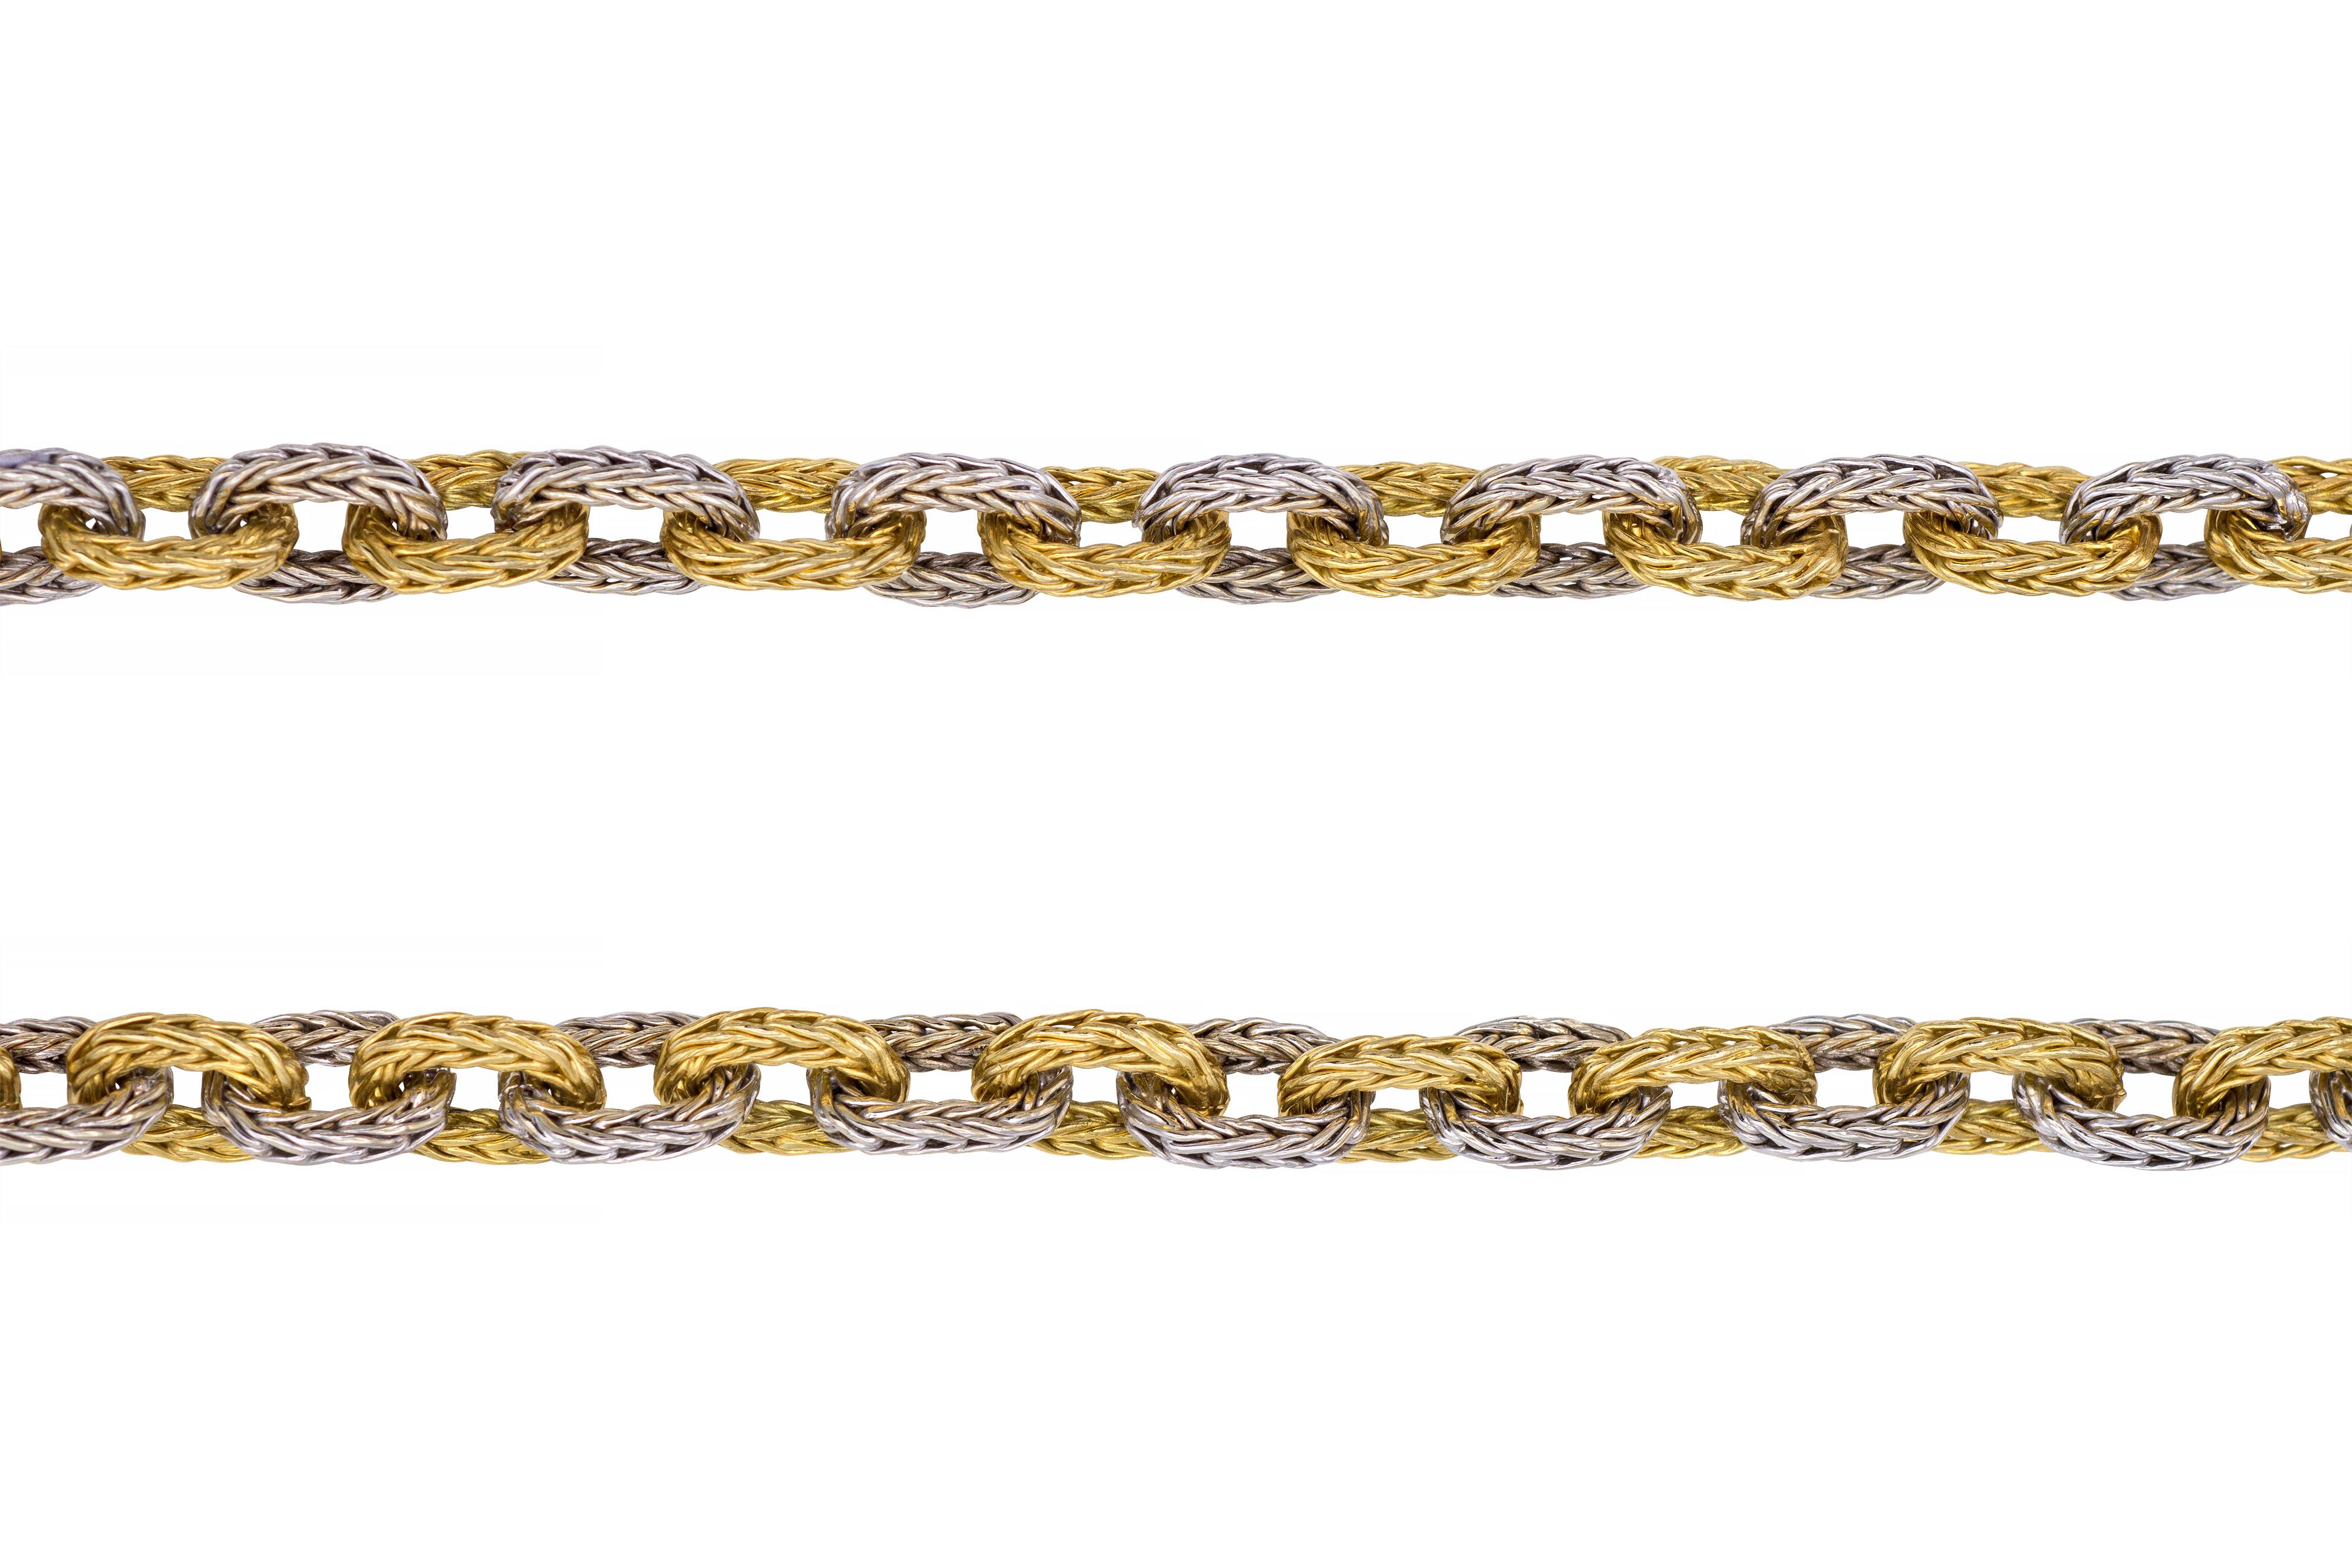 A substantial, vintage 18 karat white and yellow gold braided link chain, Italian, c. 1960. This hand-crafted suburb necklace weighs 156 plus grams. Stamped 750 with Viterbo Registered Trade Number. 

A stunning piece of jewelry that makes a